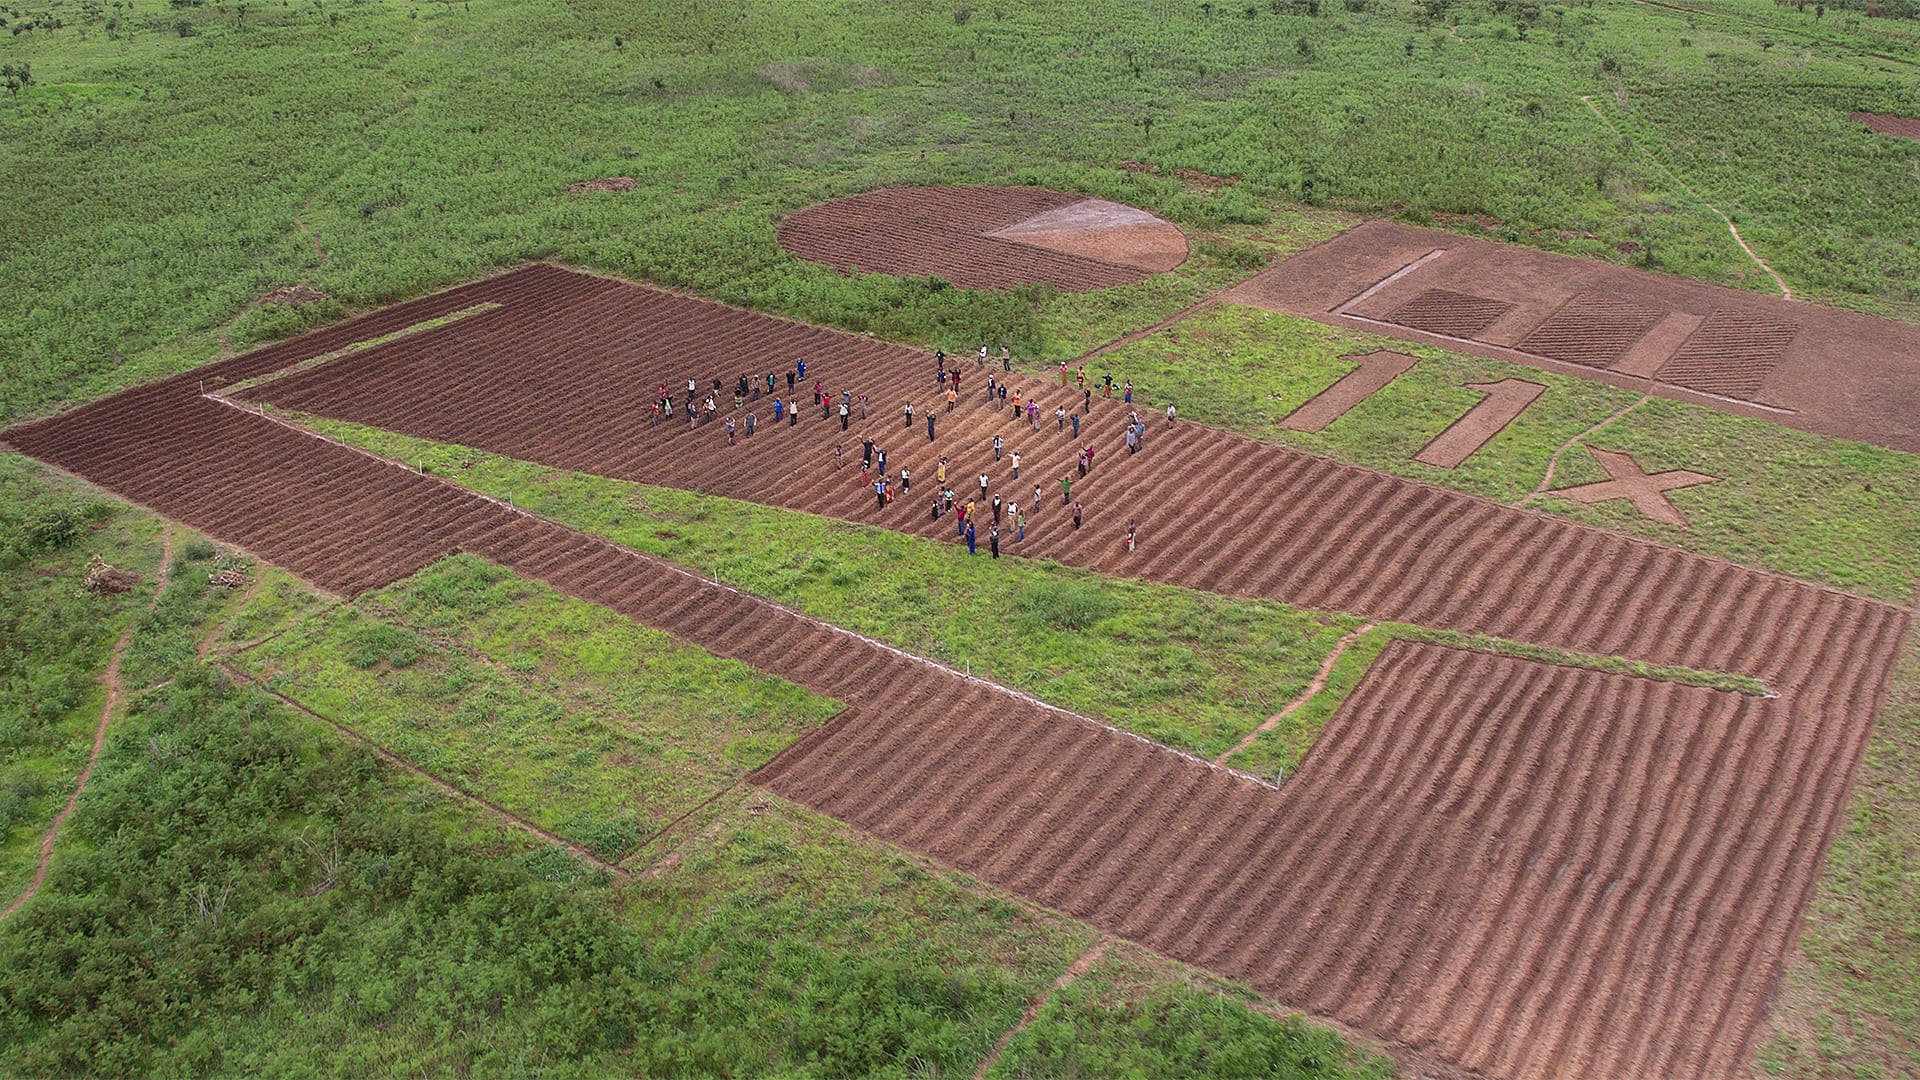 To Get The World’s Attention, These African Farmers Turned A Field Into Data